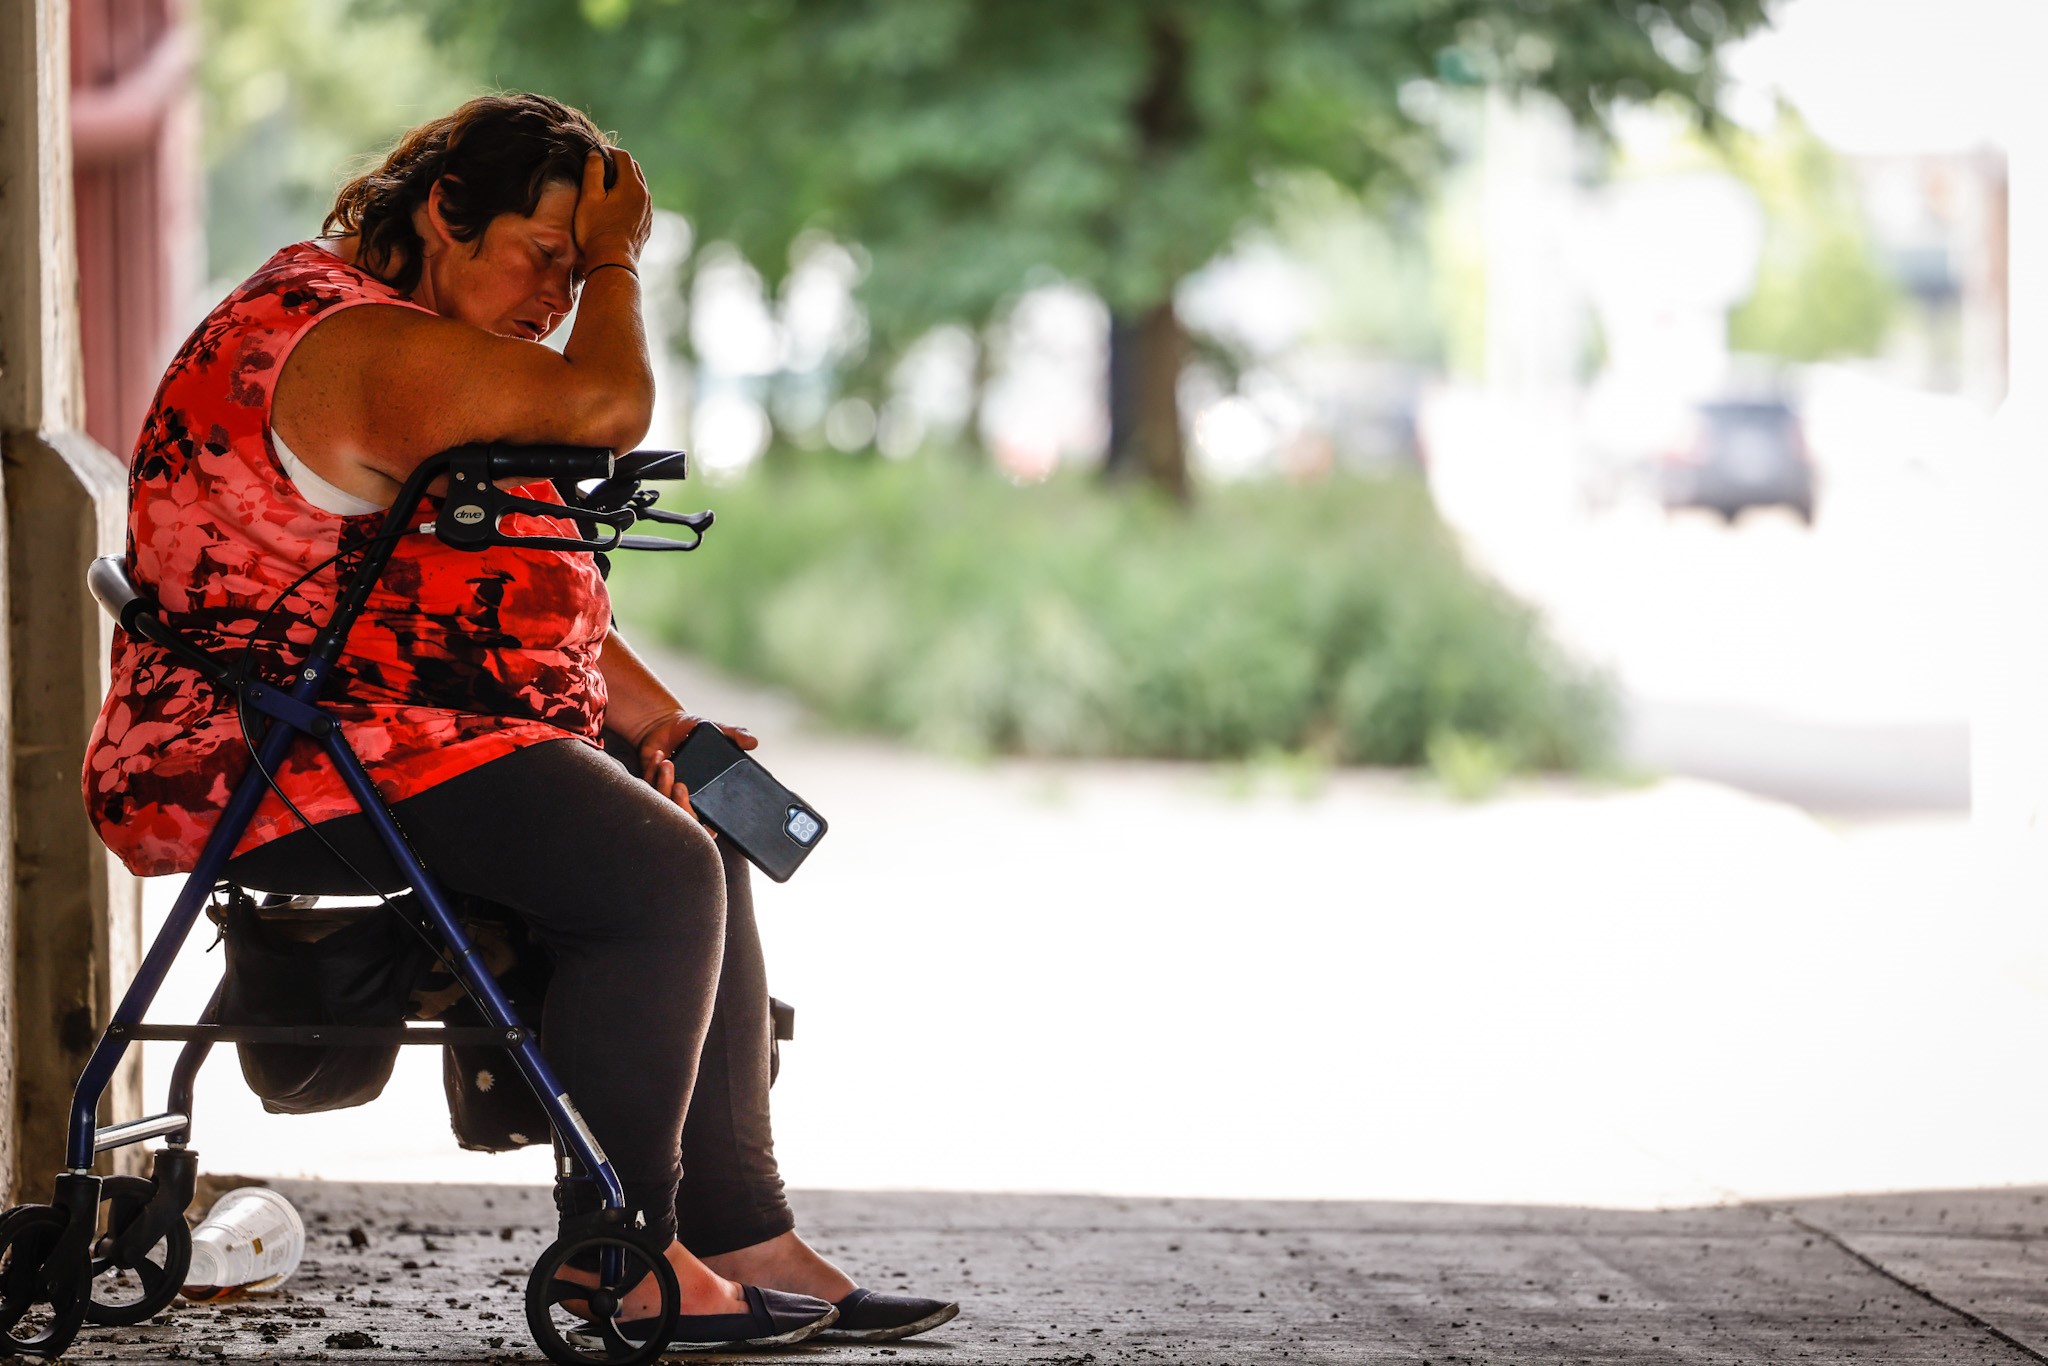 Dayton resident Sherry Griffin seeks shelter from the heat under the railroad trestle on South Patterson Blvd. on Monday, June 13, 2022. Temperatures are expected to soar into the 90s most of the week with heat indexes in the 100. JIM NOELKER/STAFF